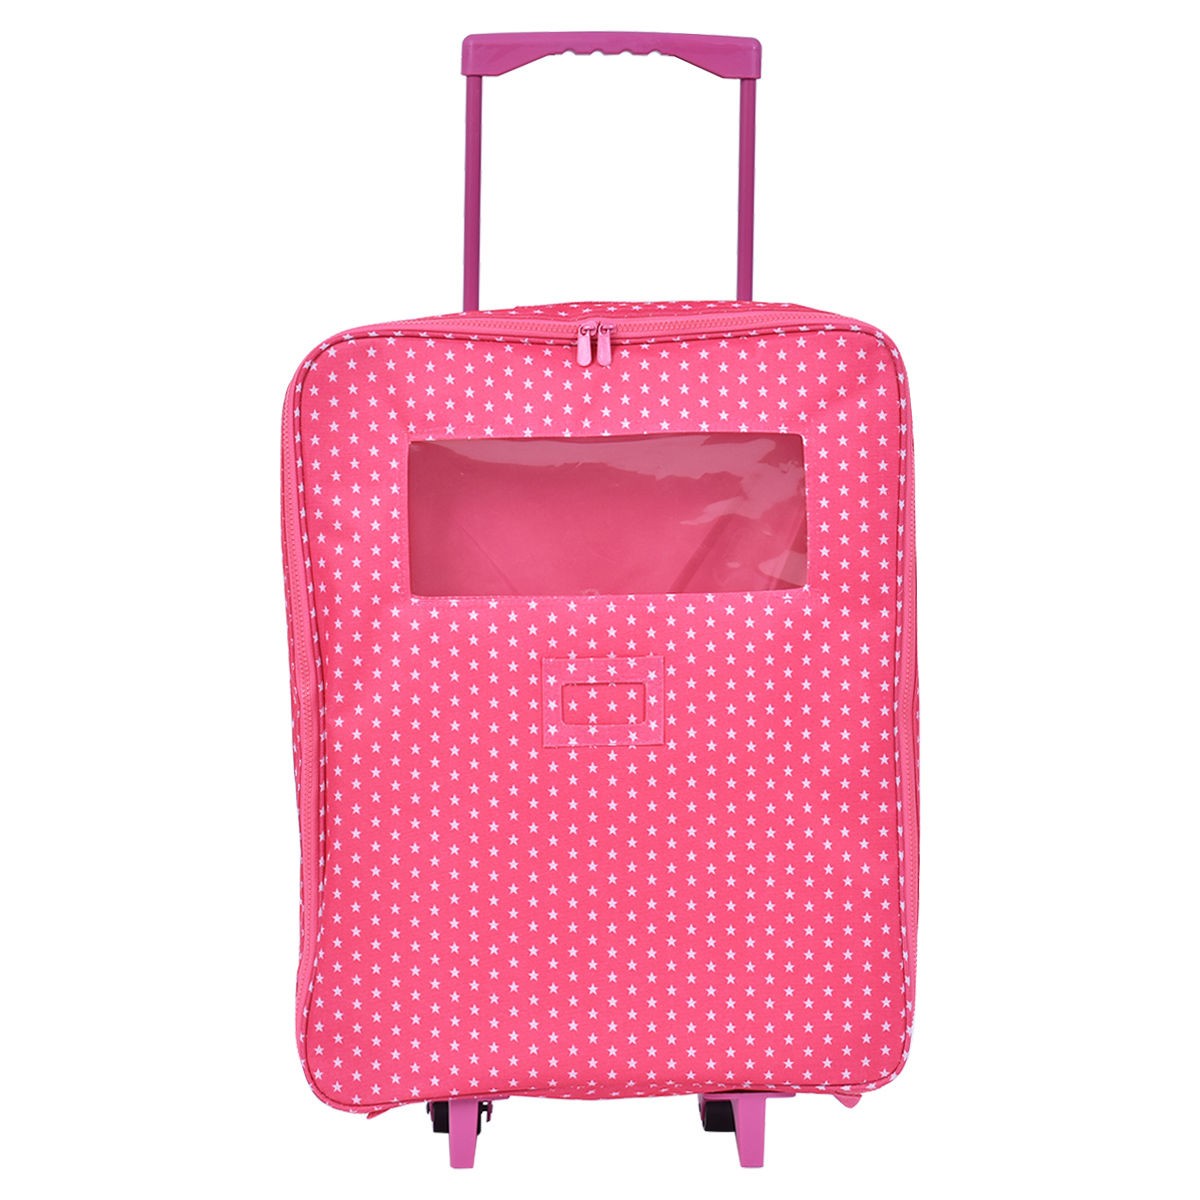 18 In. 2 Dolls Travel Carrier Trolley Case With Bed And Bedding